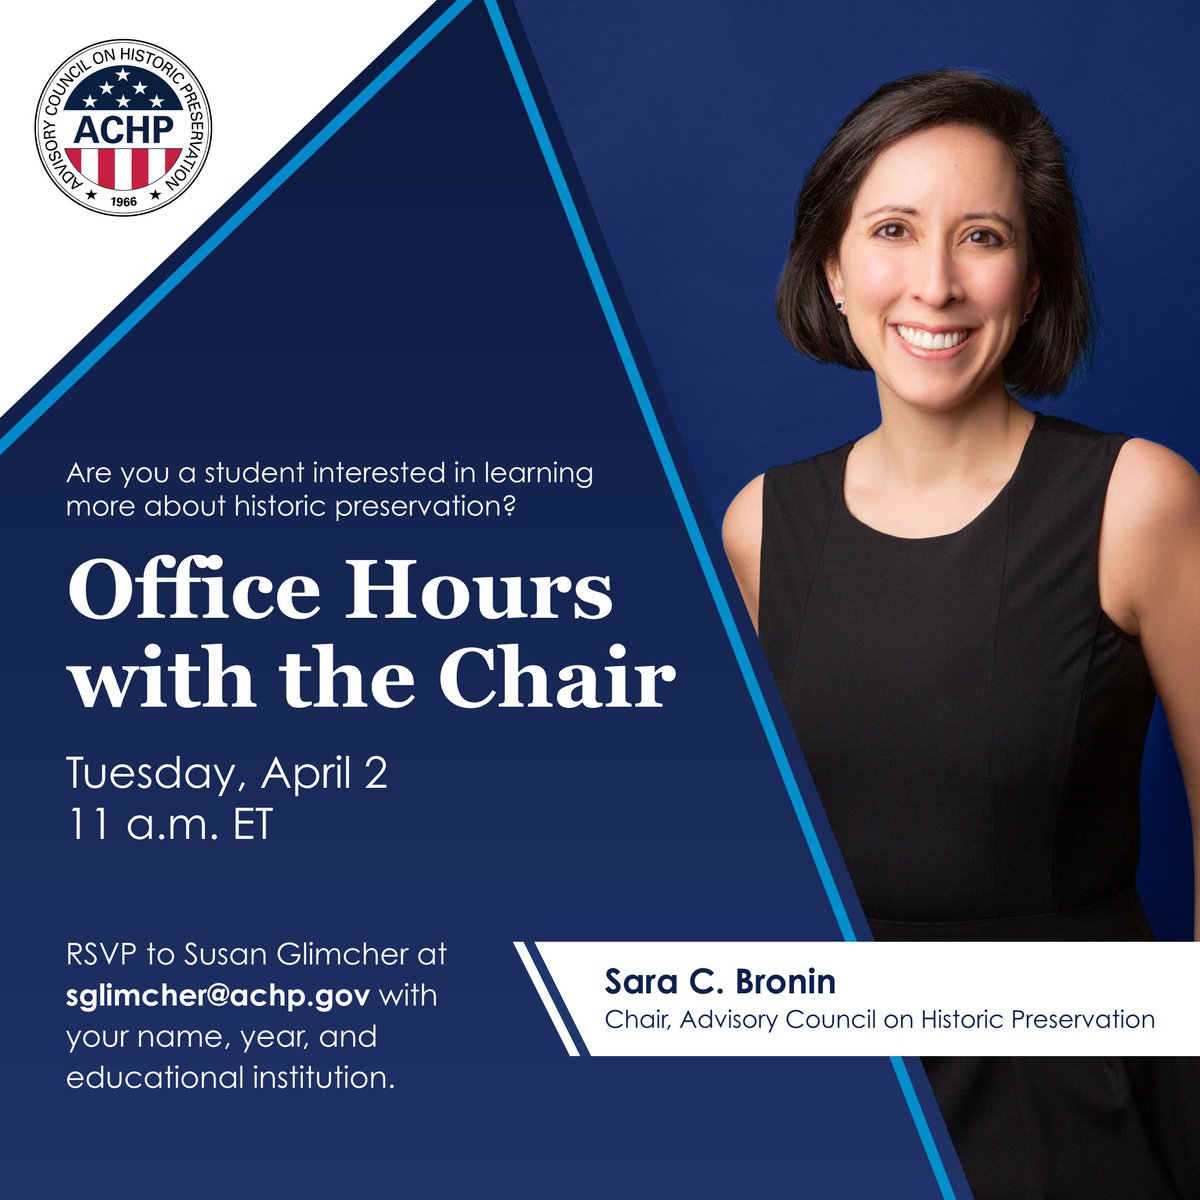 Students interested in learning more about the field of historic preservation, join ACHP @ChairBronin for her Office Hours, 11 a.m. ET Tues. April 2. You can speak directly with Chair Bronin & ask her questions. RSVP sglimcher@achp.gov with your name, year, & school.